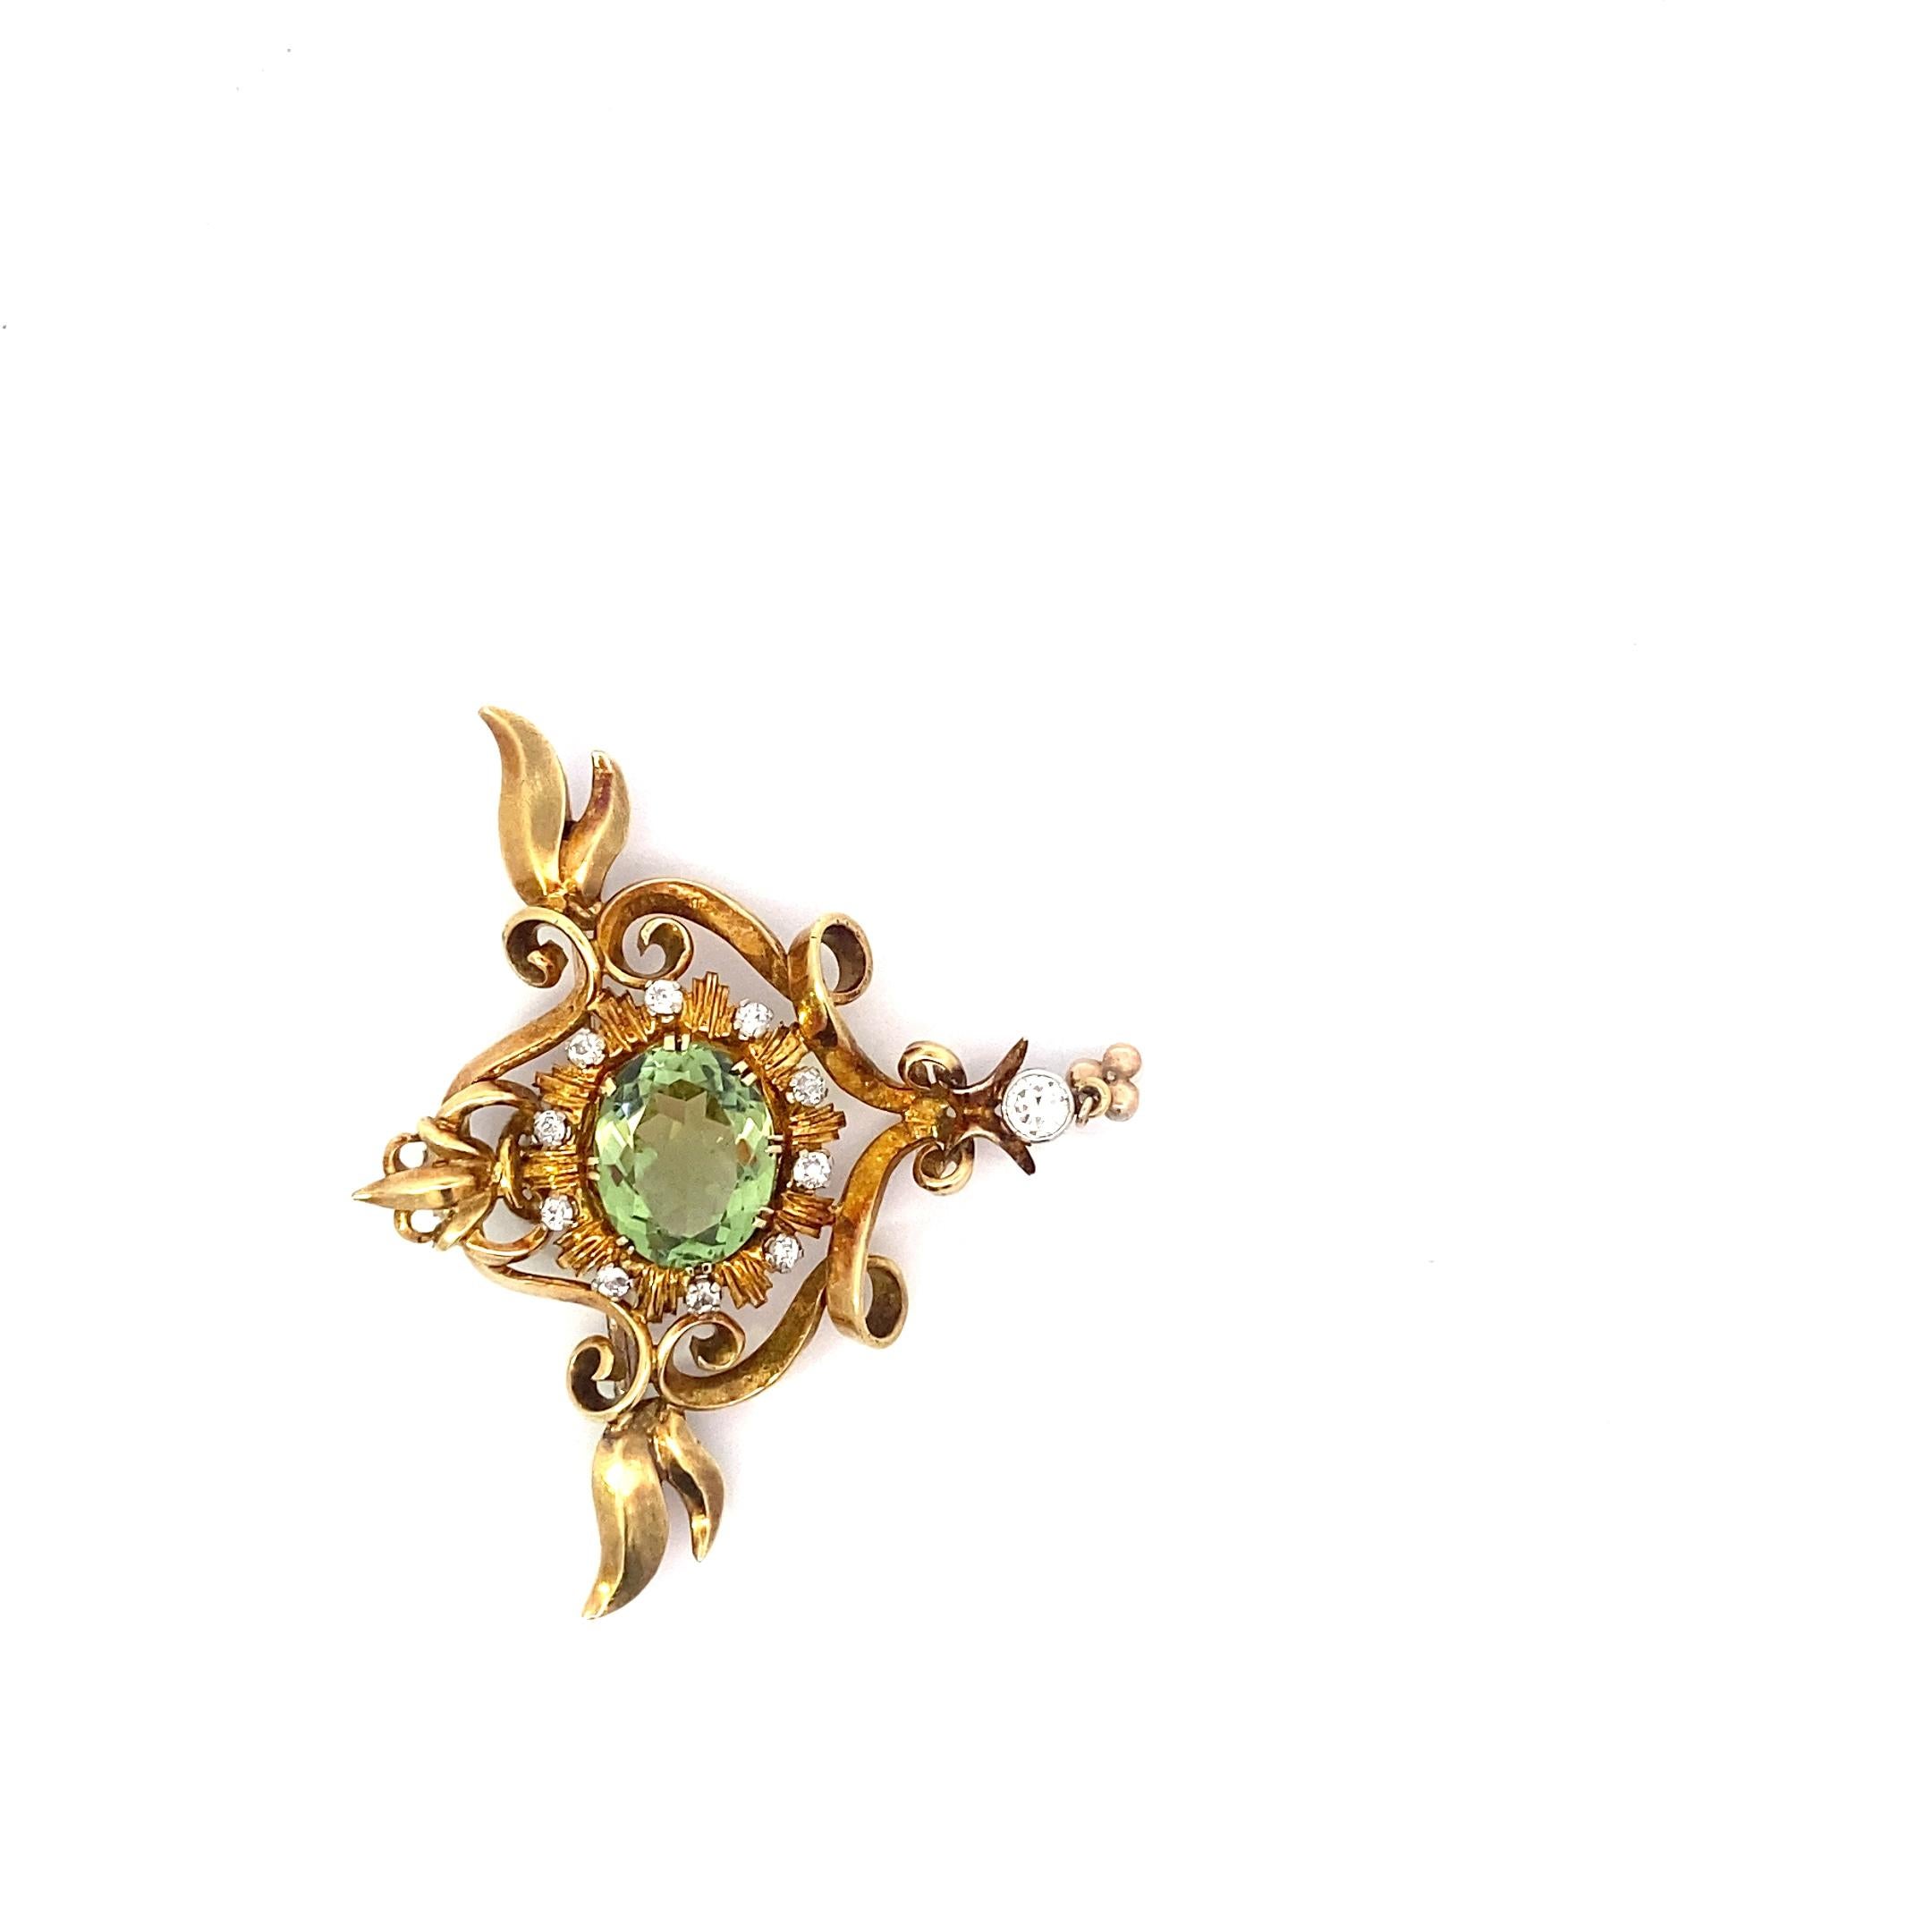 This one of a kind brooch, made in the early 20th century, features a gorgeous sparkling brilliant cut peridot stone. The peridot is transparent with no visible inclusions. 

As was typical of this era, the piece also features some small diamonds